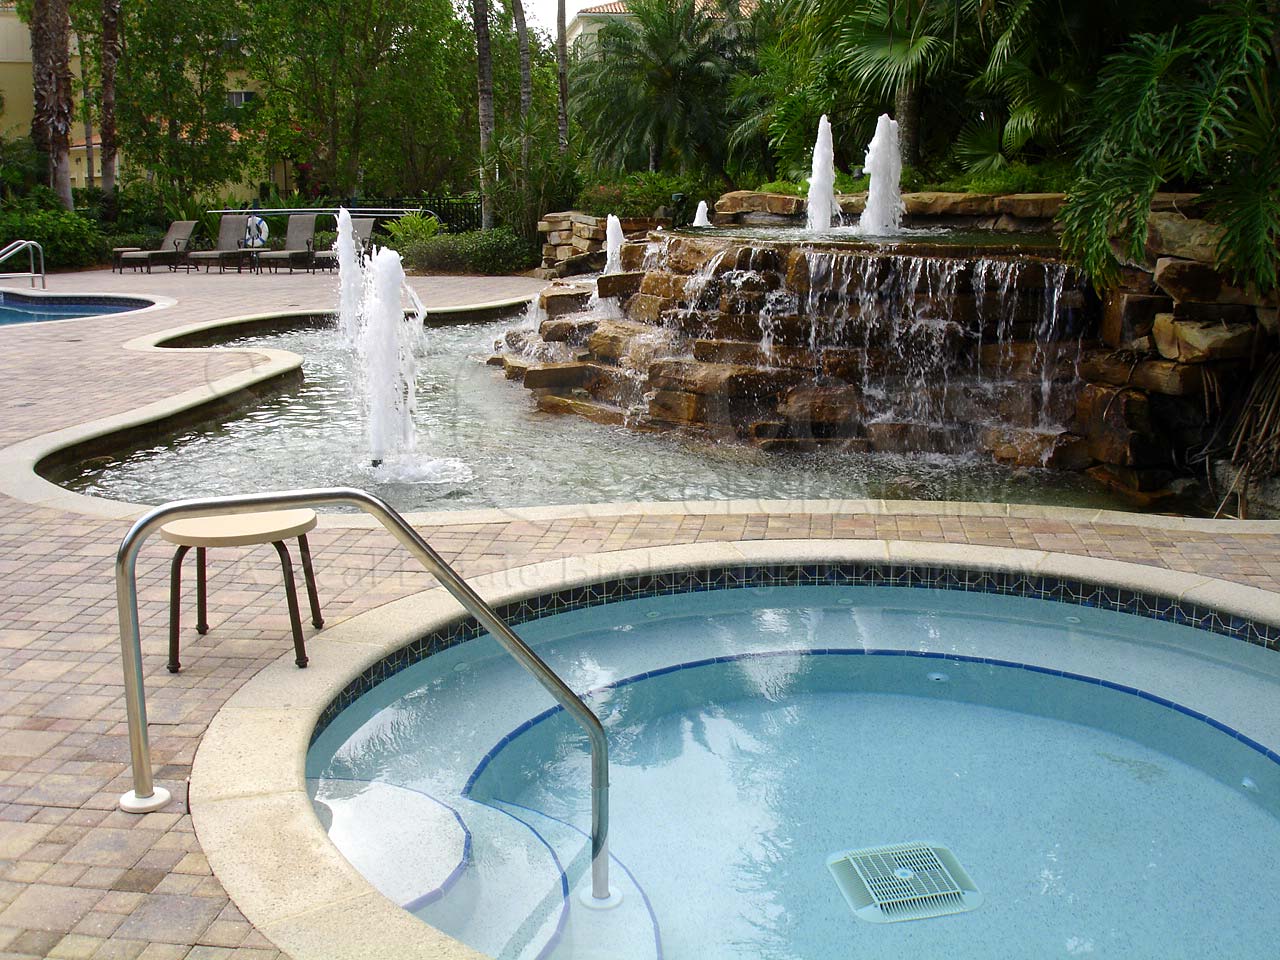 Castillo Community Pool, Waterfall and Fountain